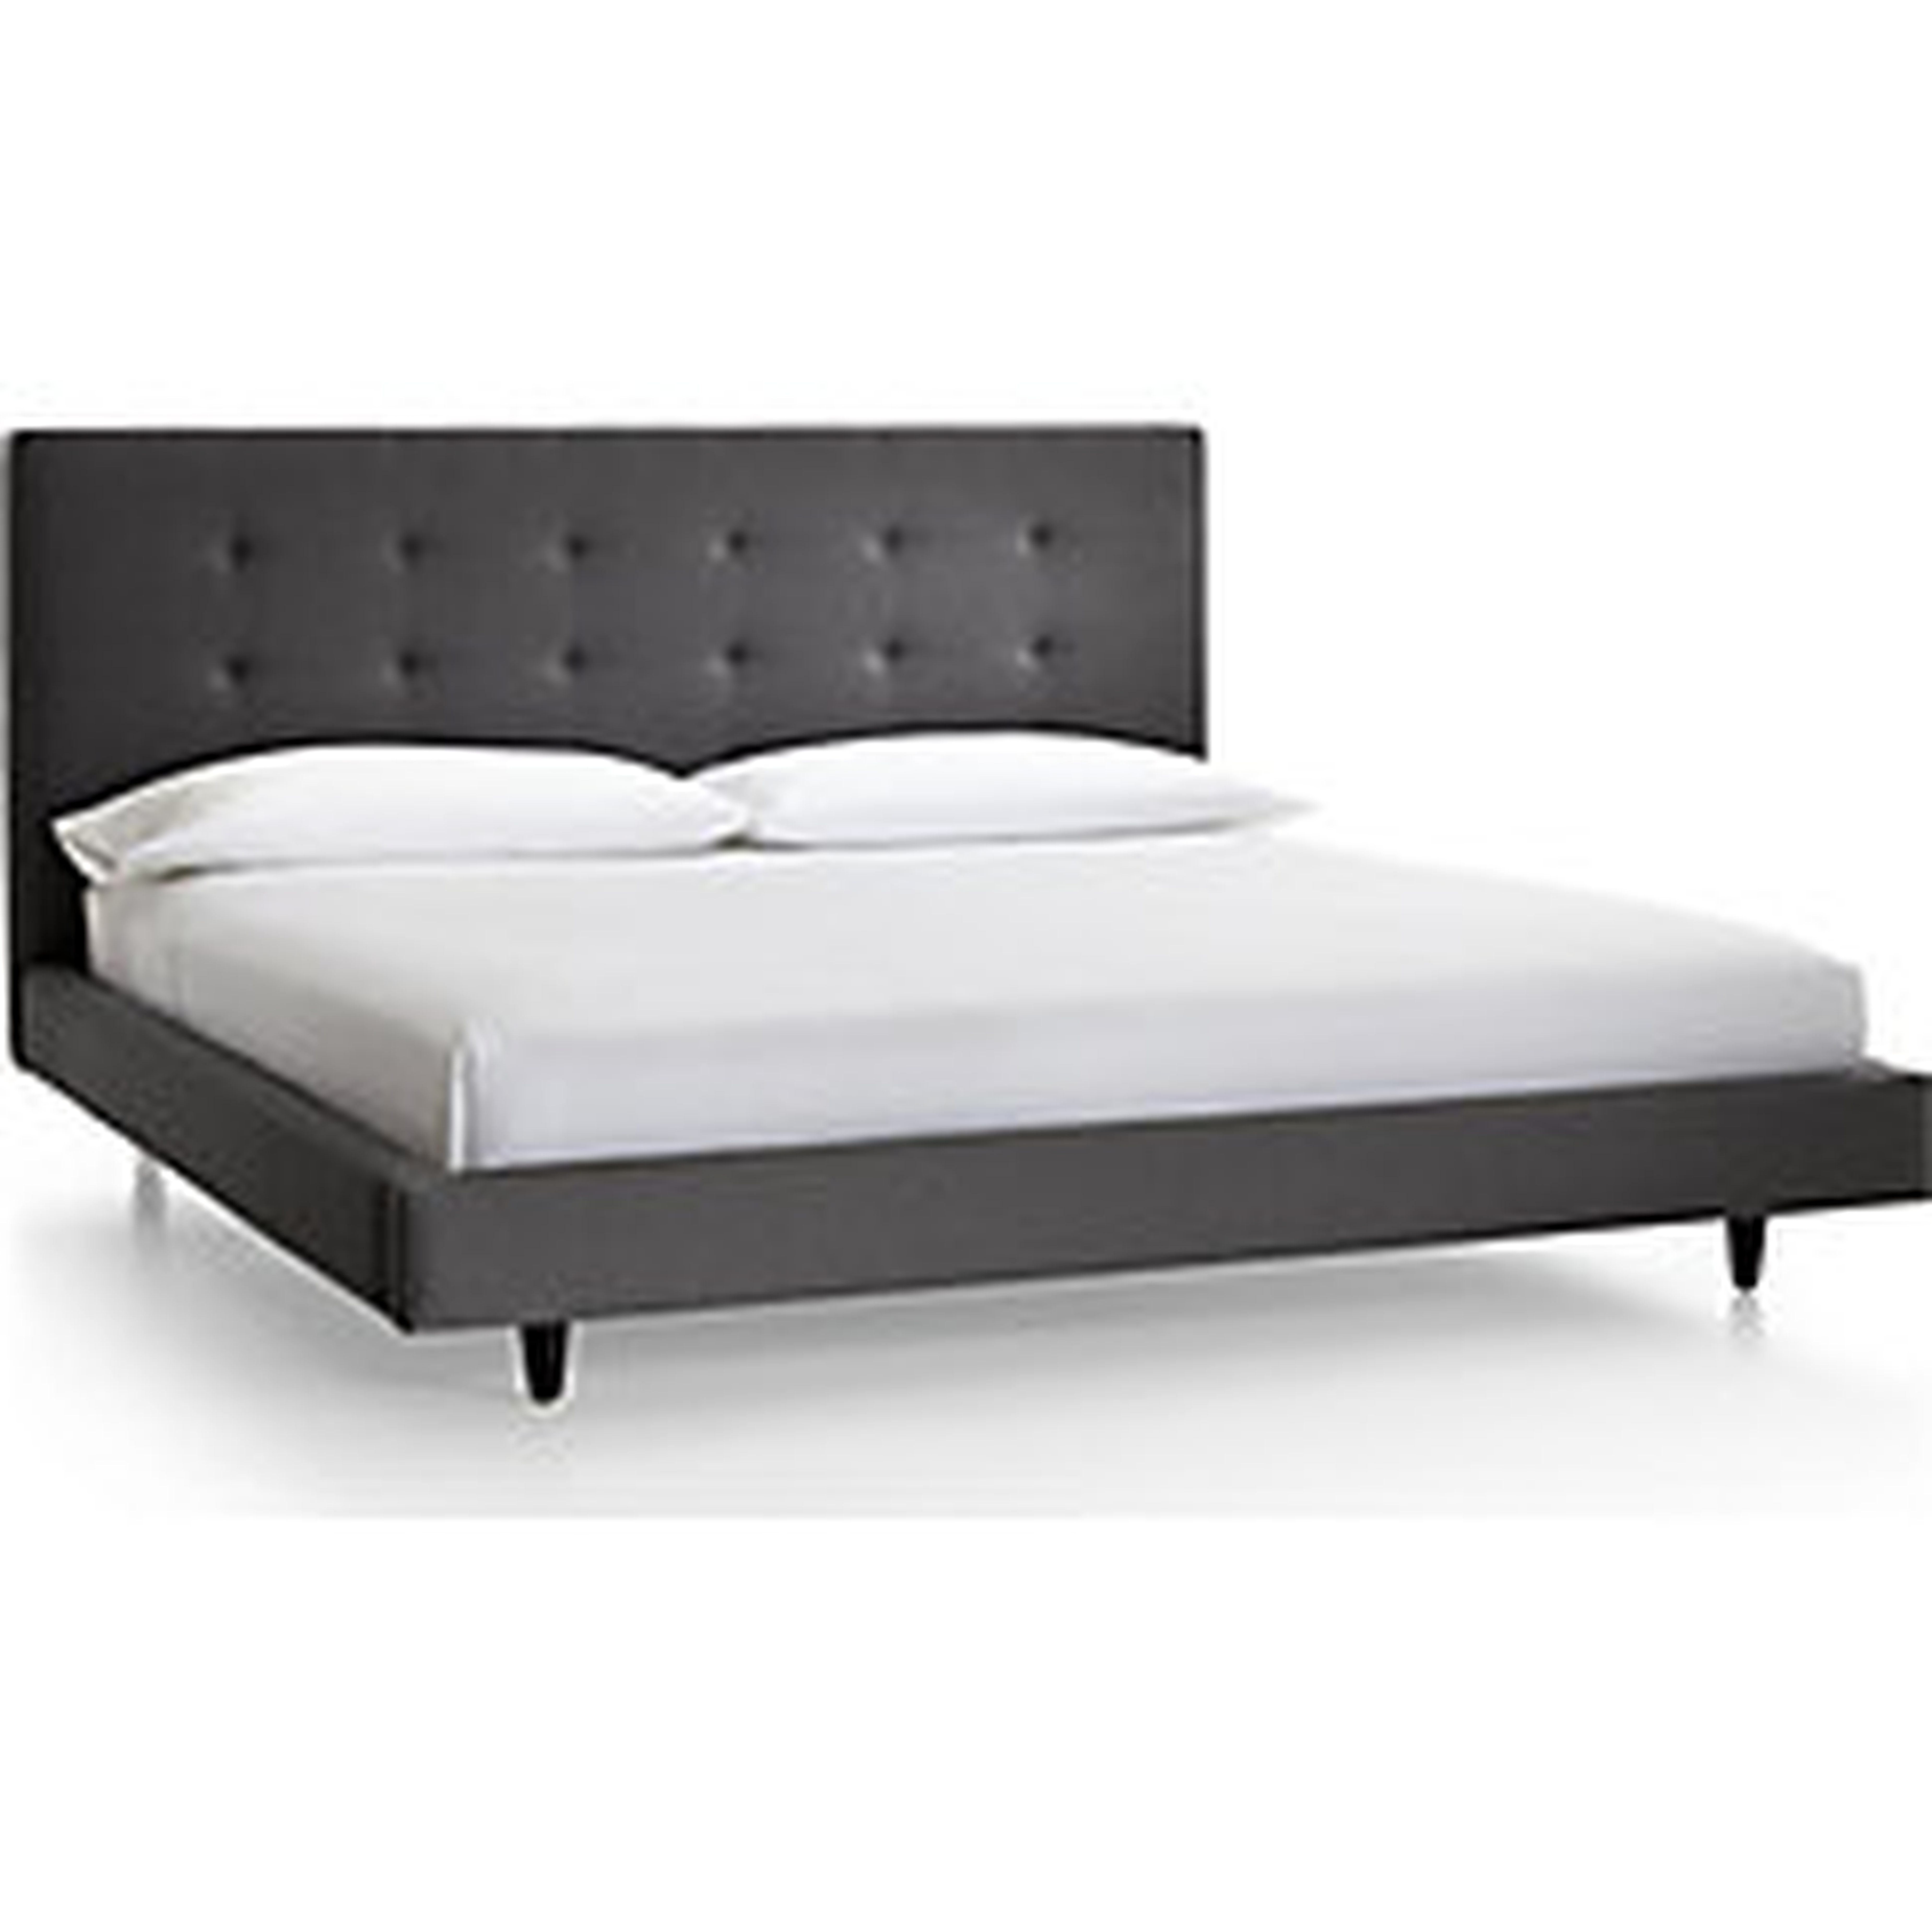 Tate Tall Upholstered King Bed. - Crate and Barrel